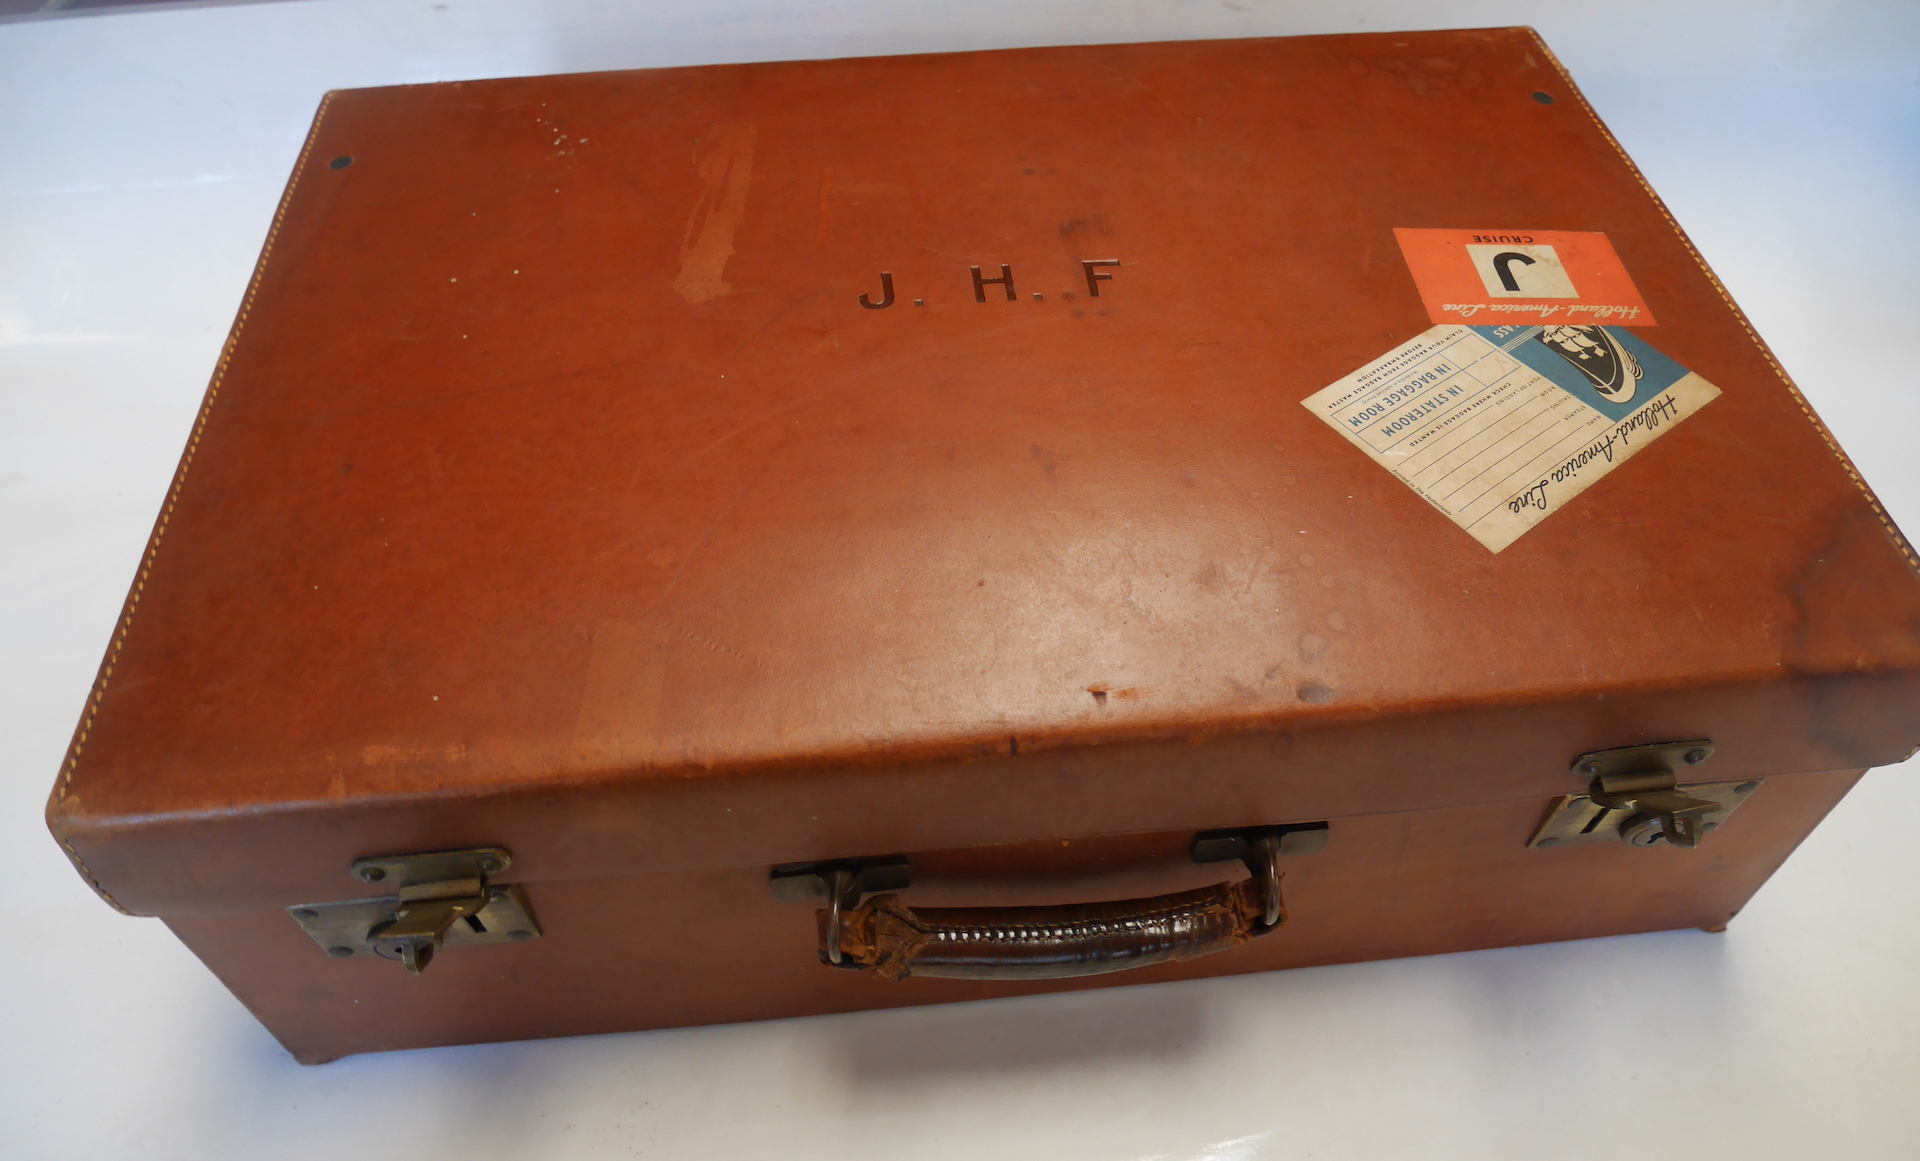 Leather suitcase by " Finnigans Bond Street London " with London silver bottles